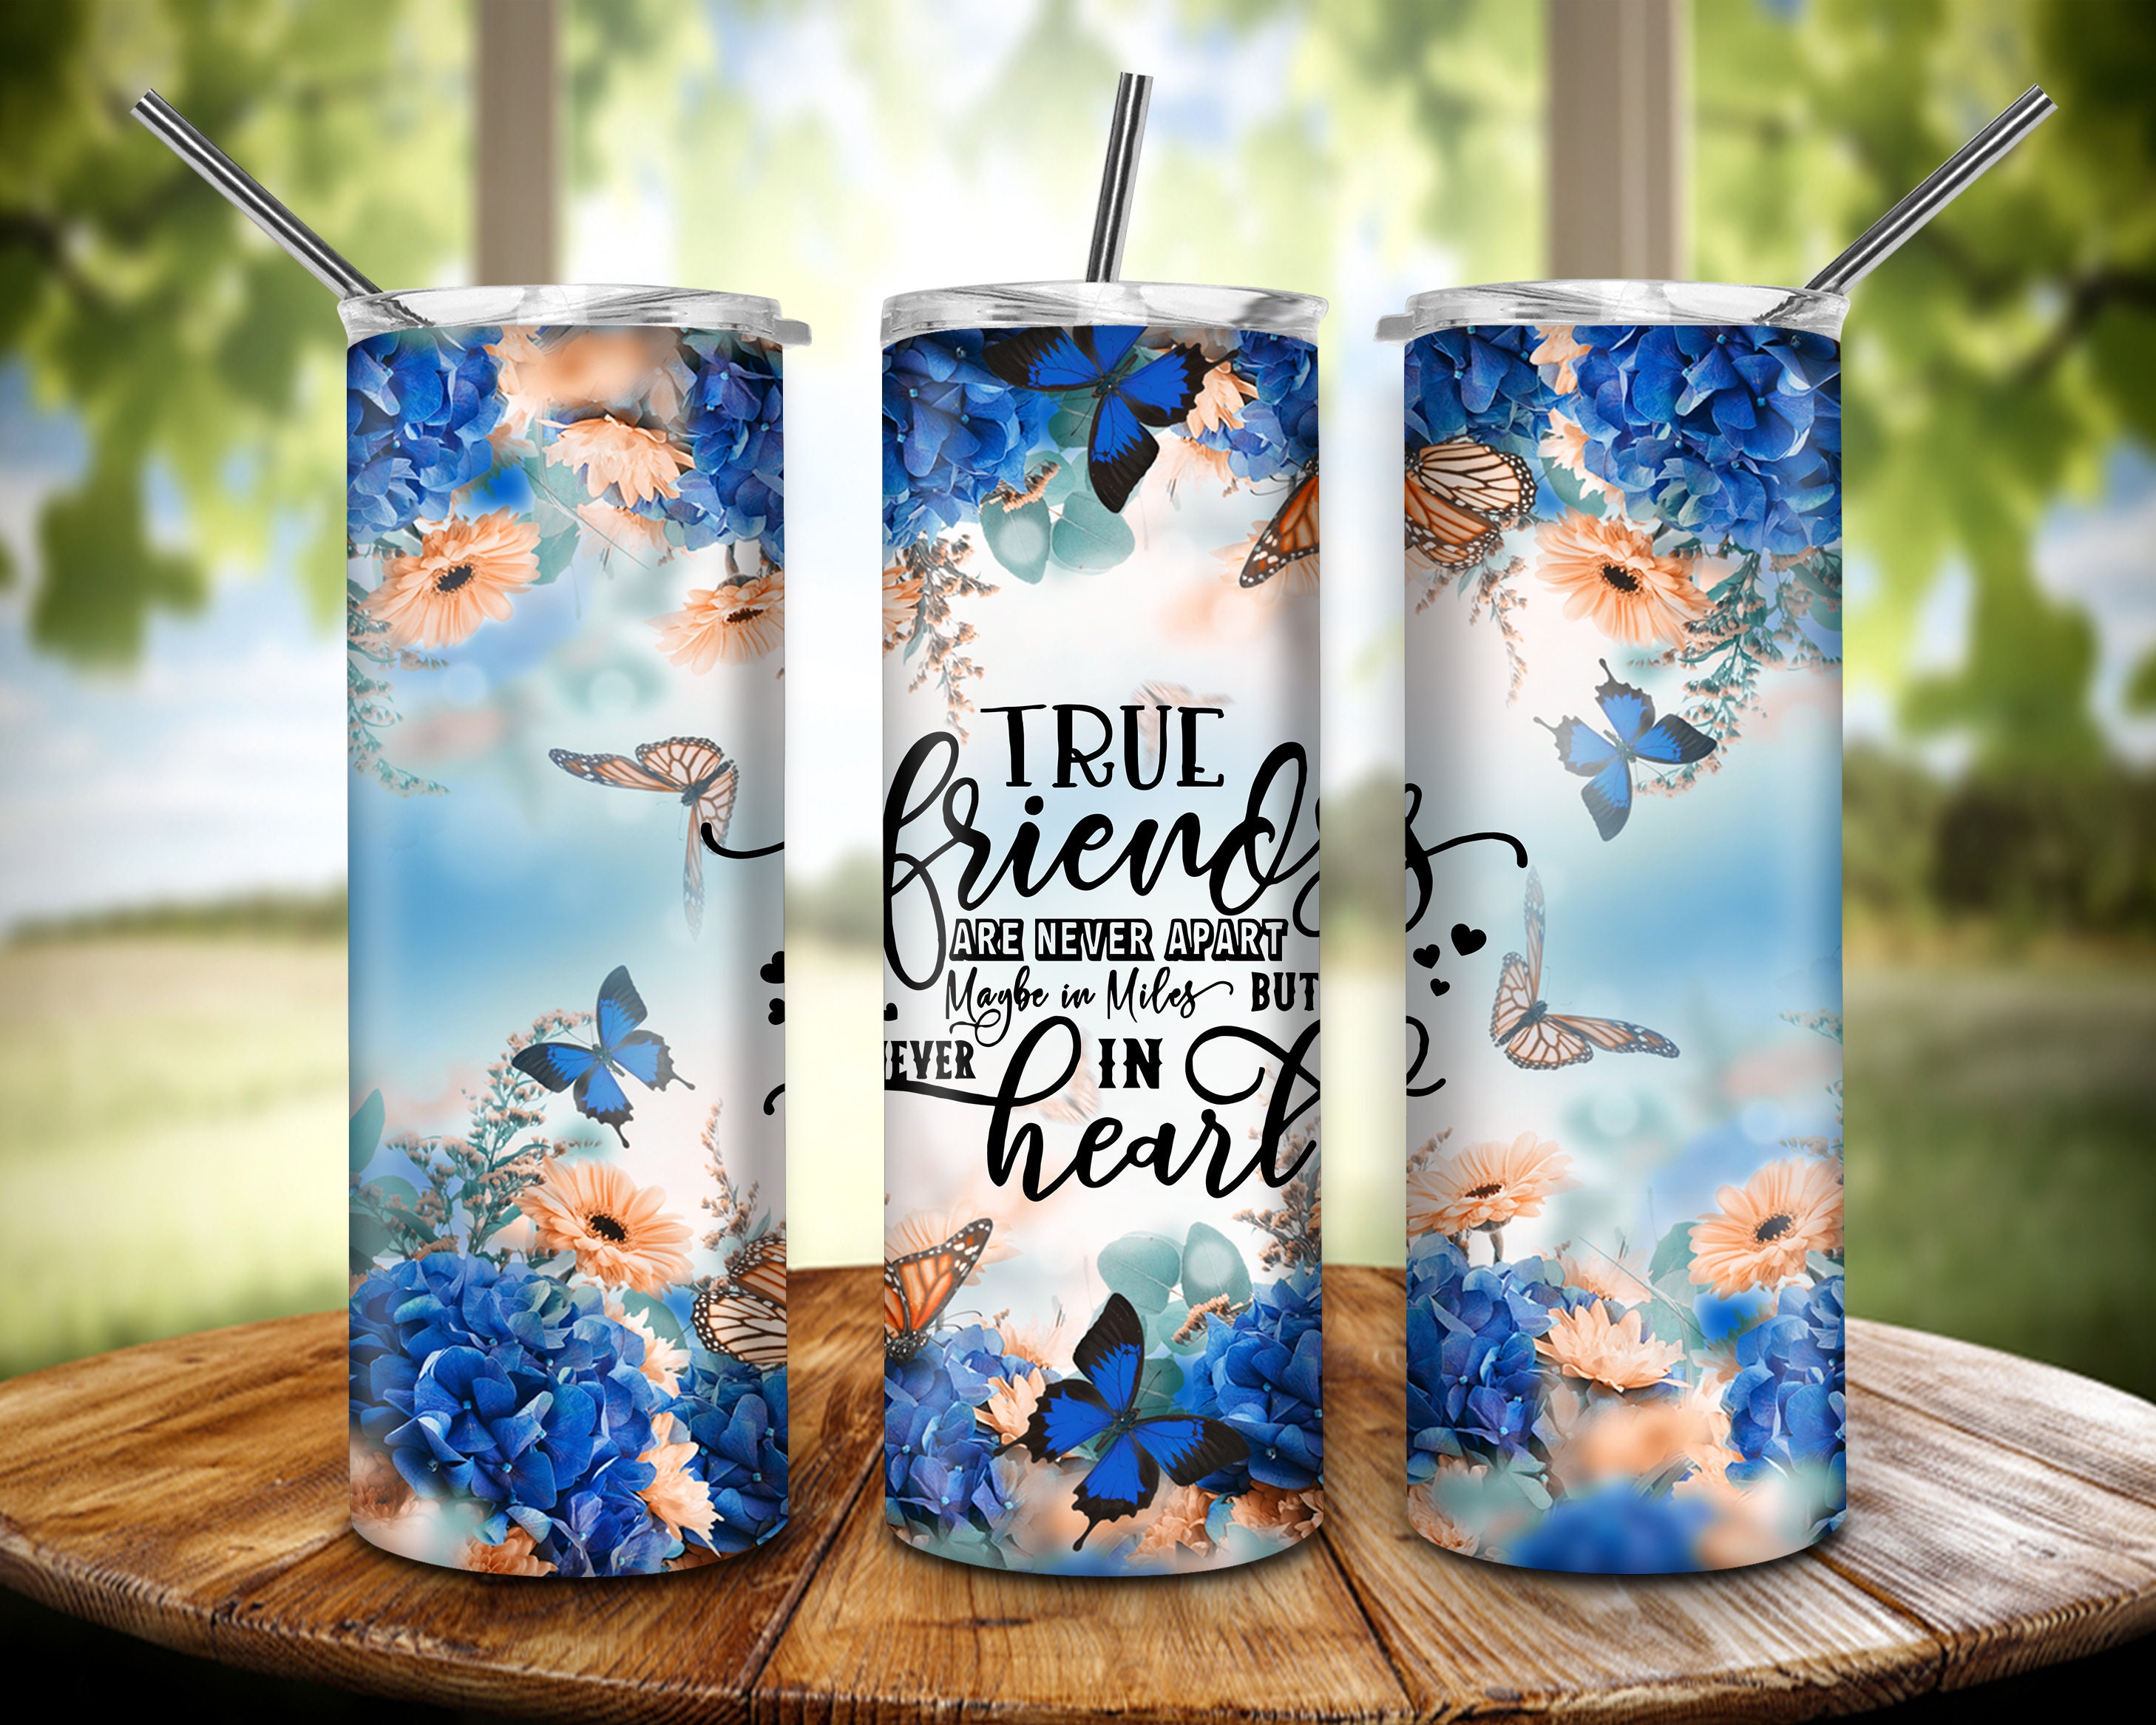 Friend Gift for Men: Best Friend Ever! Large Insulated Tumbler